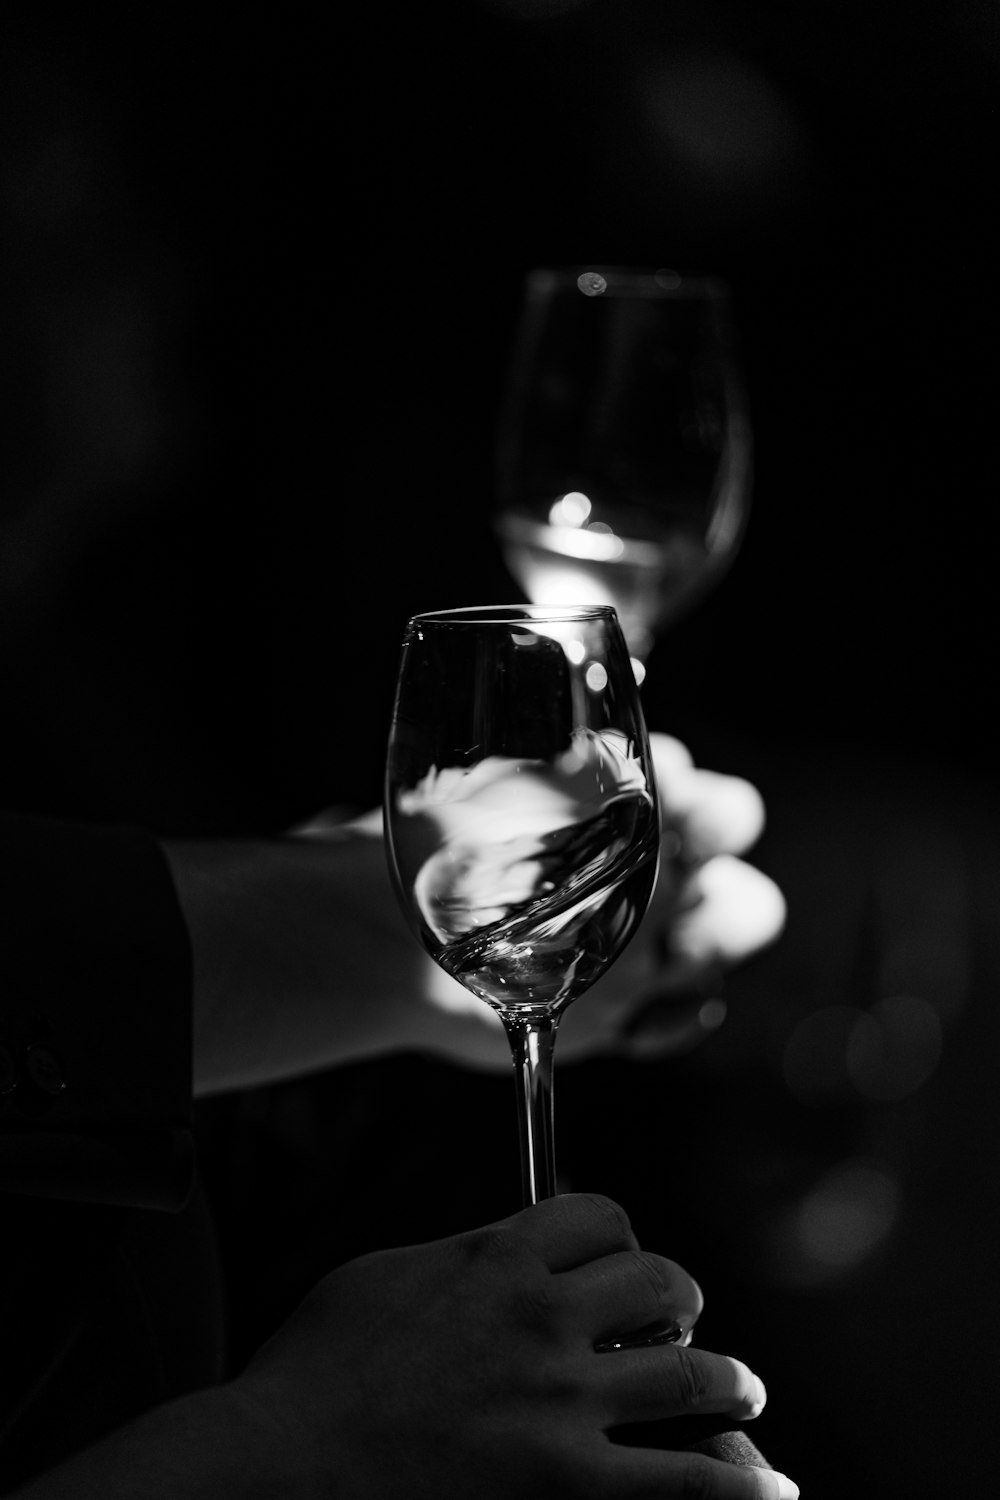 a person holding a wine glass in their hand